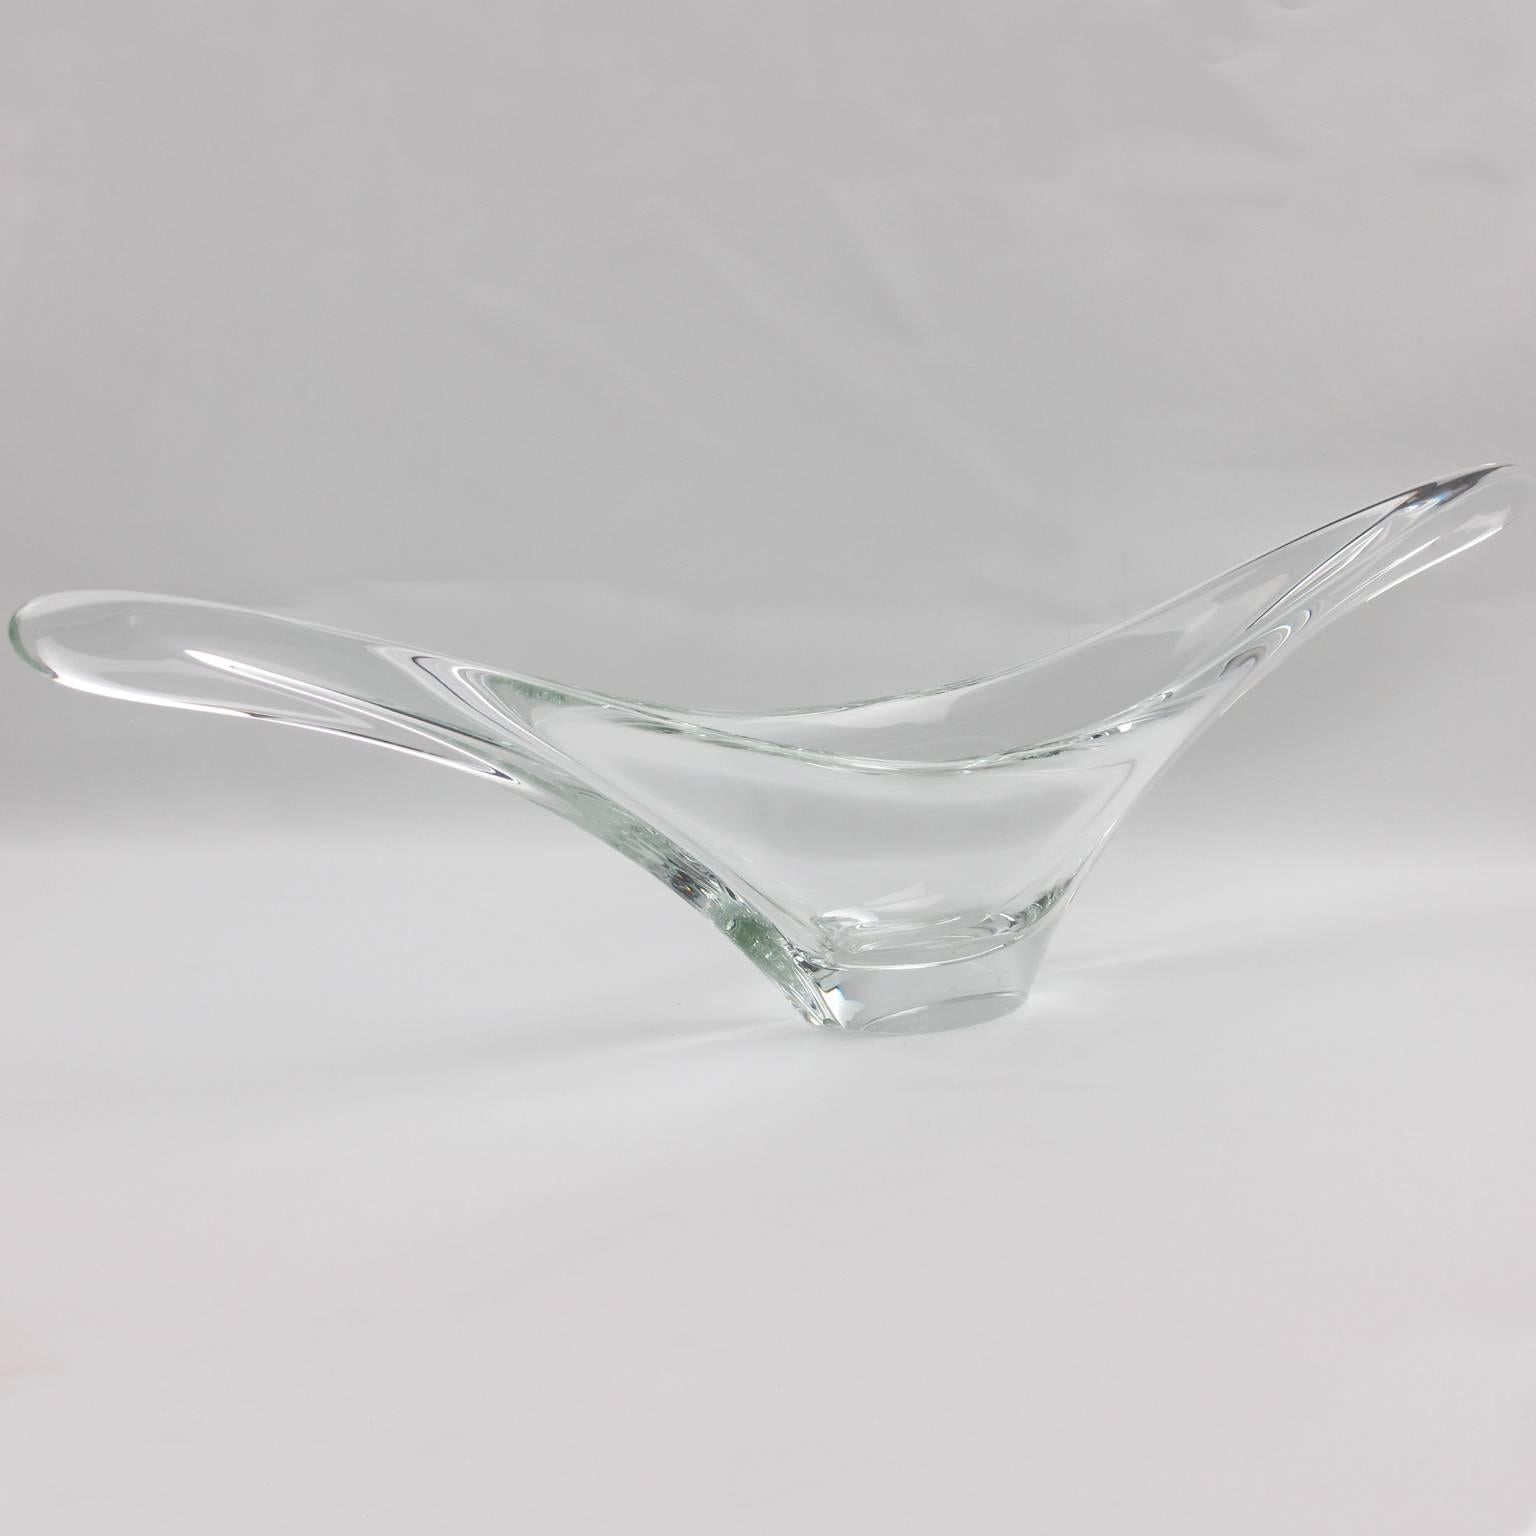 Impressive sculptural clear crystal centerpiece bowl or vase by Daum, France, circa 1950s. Typical Daum Mid-Century Modernist elongated abstract design, and although thick and heavy, this piece has a smooth and light shape. Etched signature of Daum